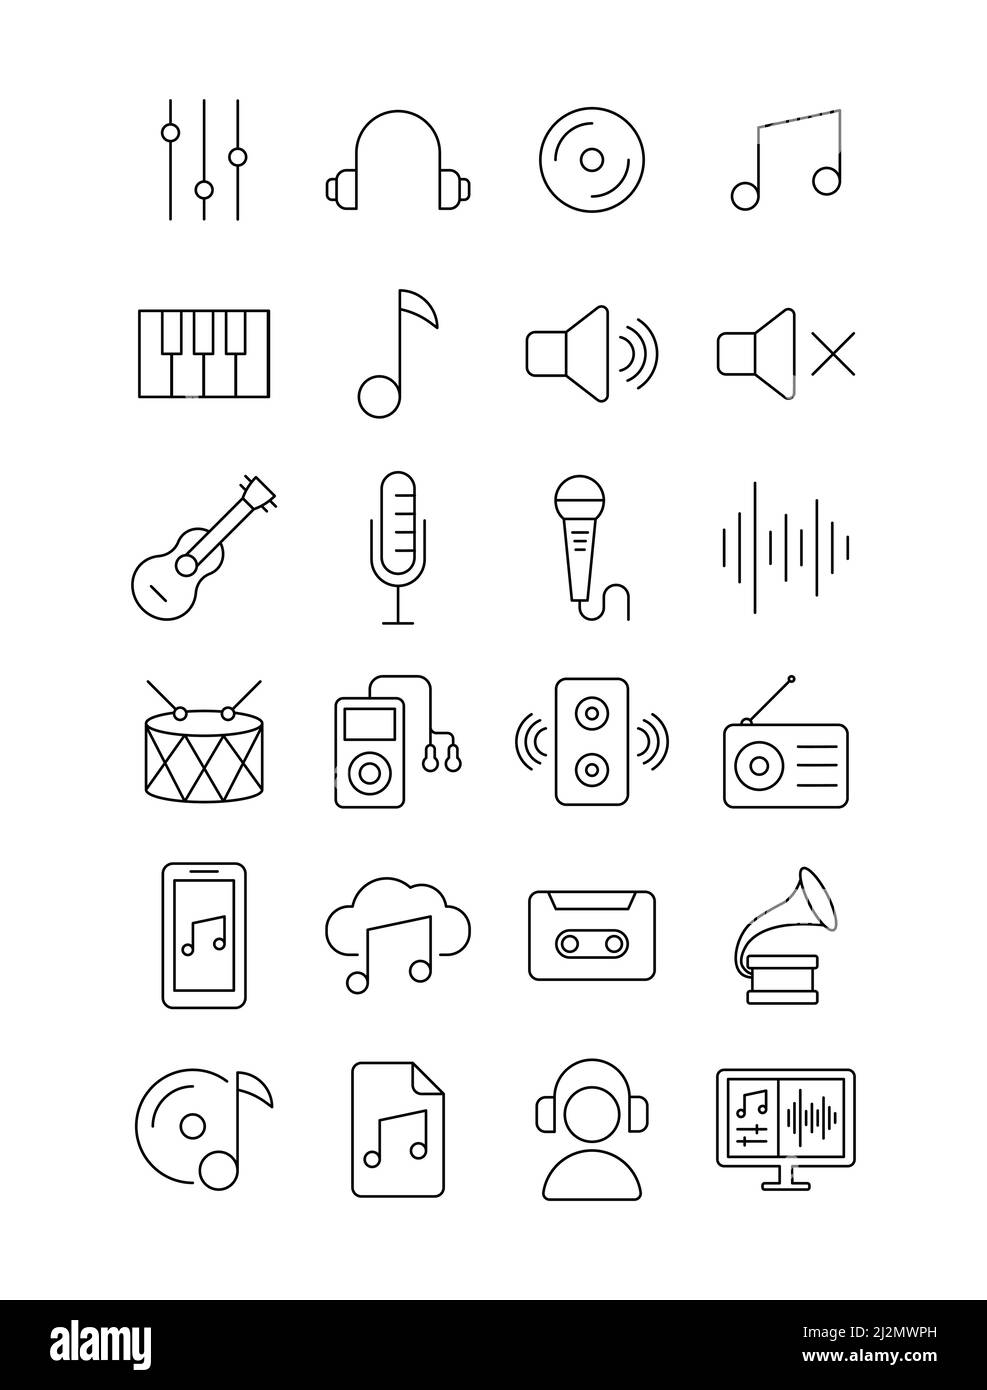 Music vector line icon set on white background Stock Vector